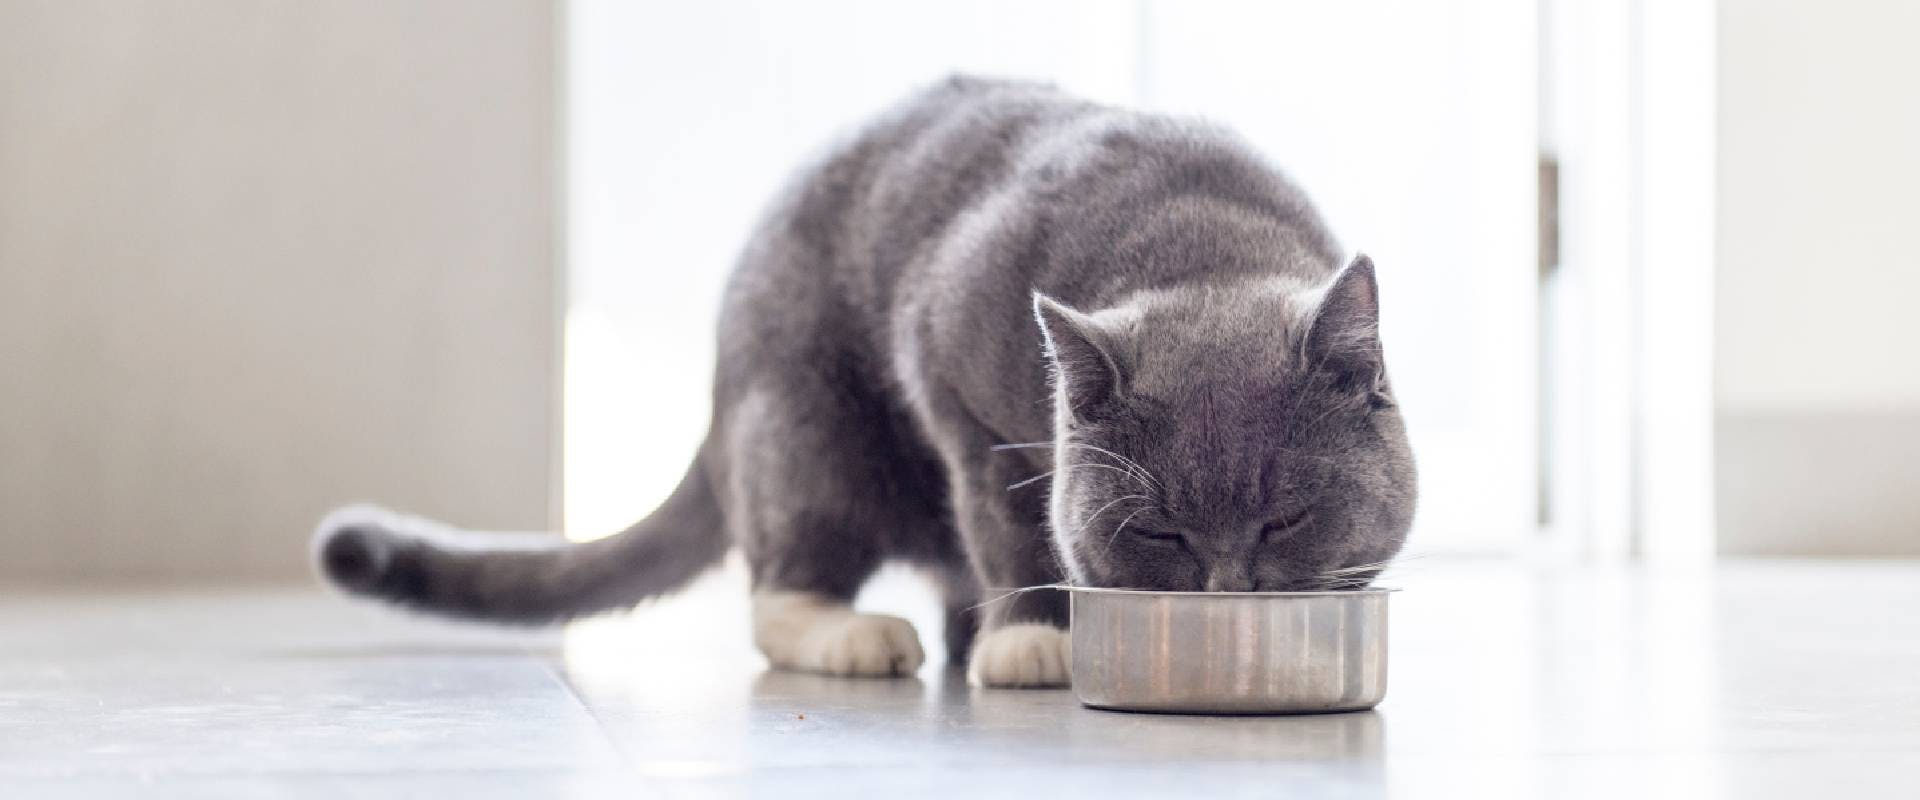 Grey cat eating from a metal bowl